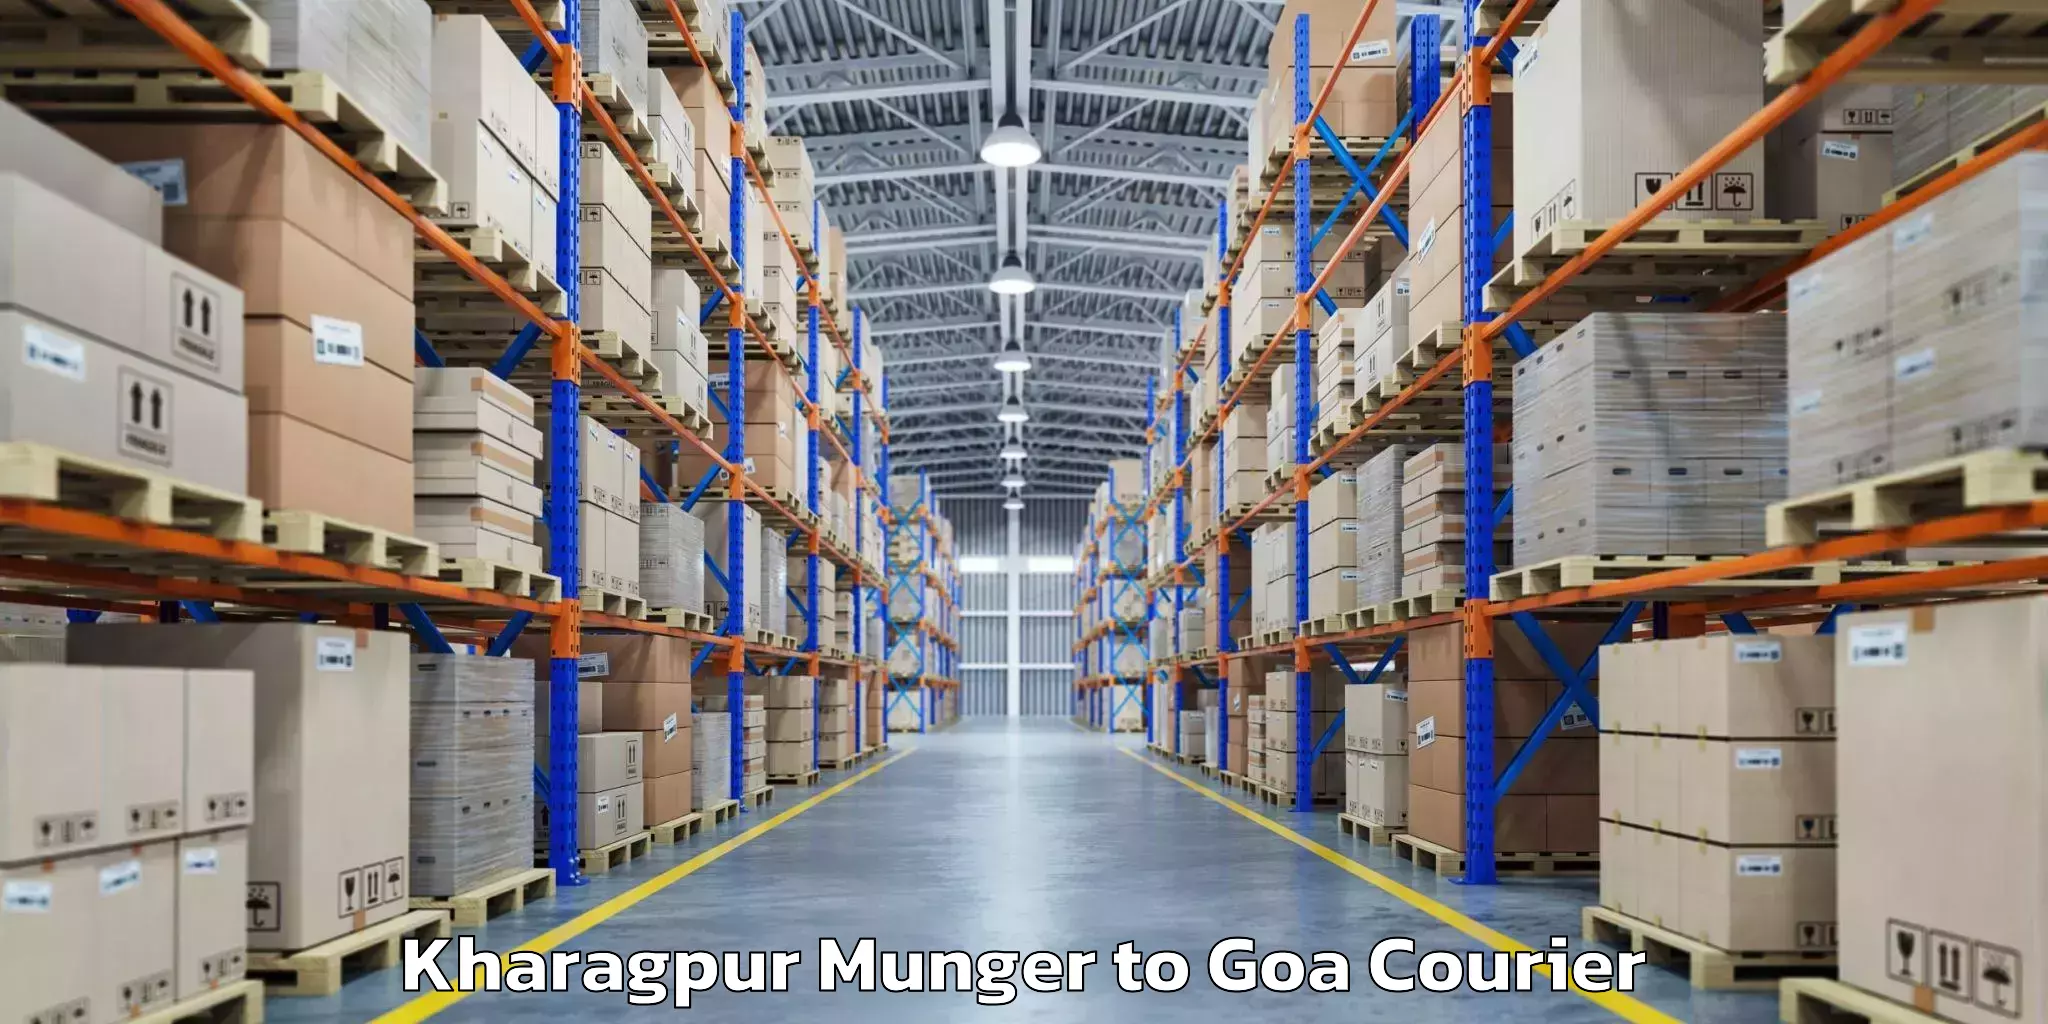 Instant baggage transport quote in Kharagpur Munger to Panaji